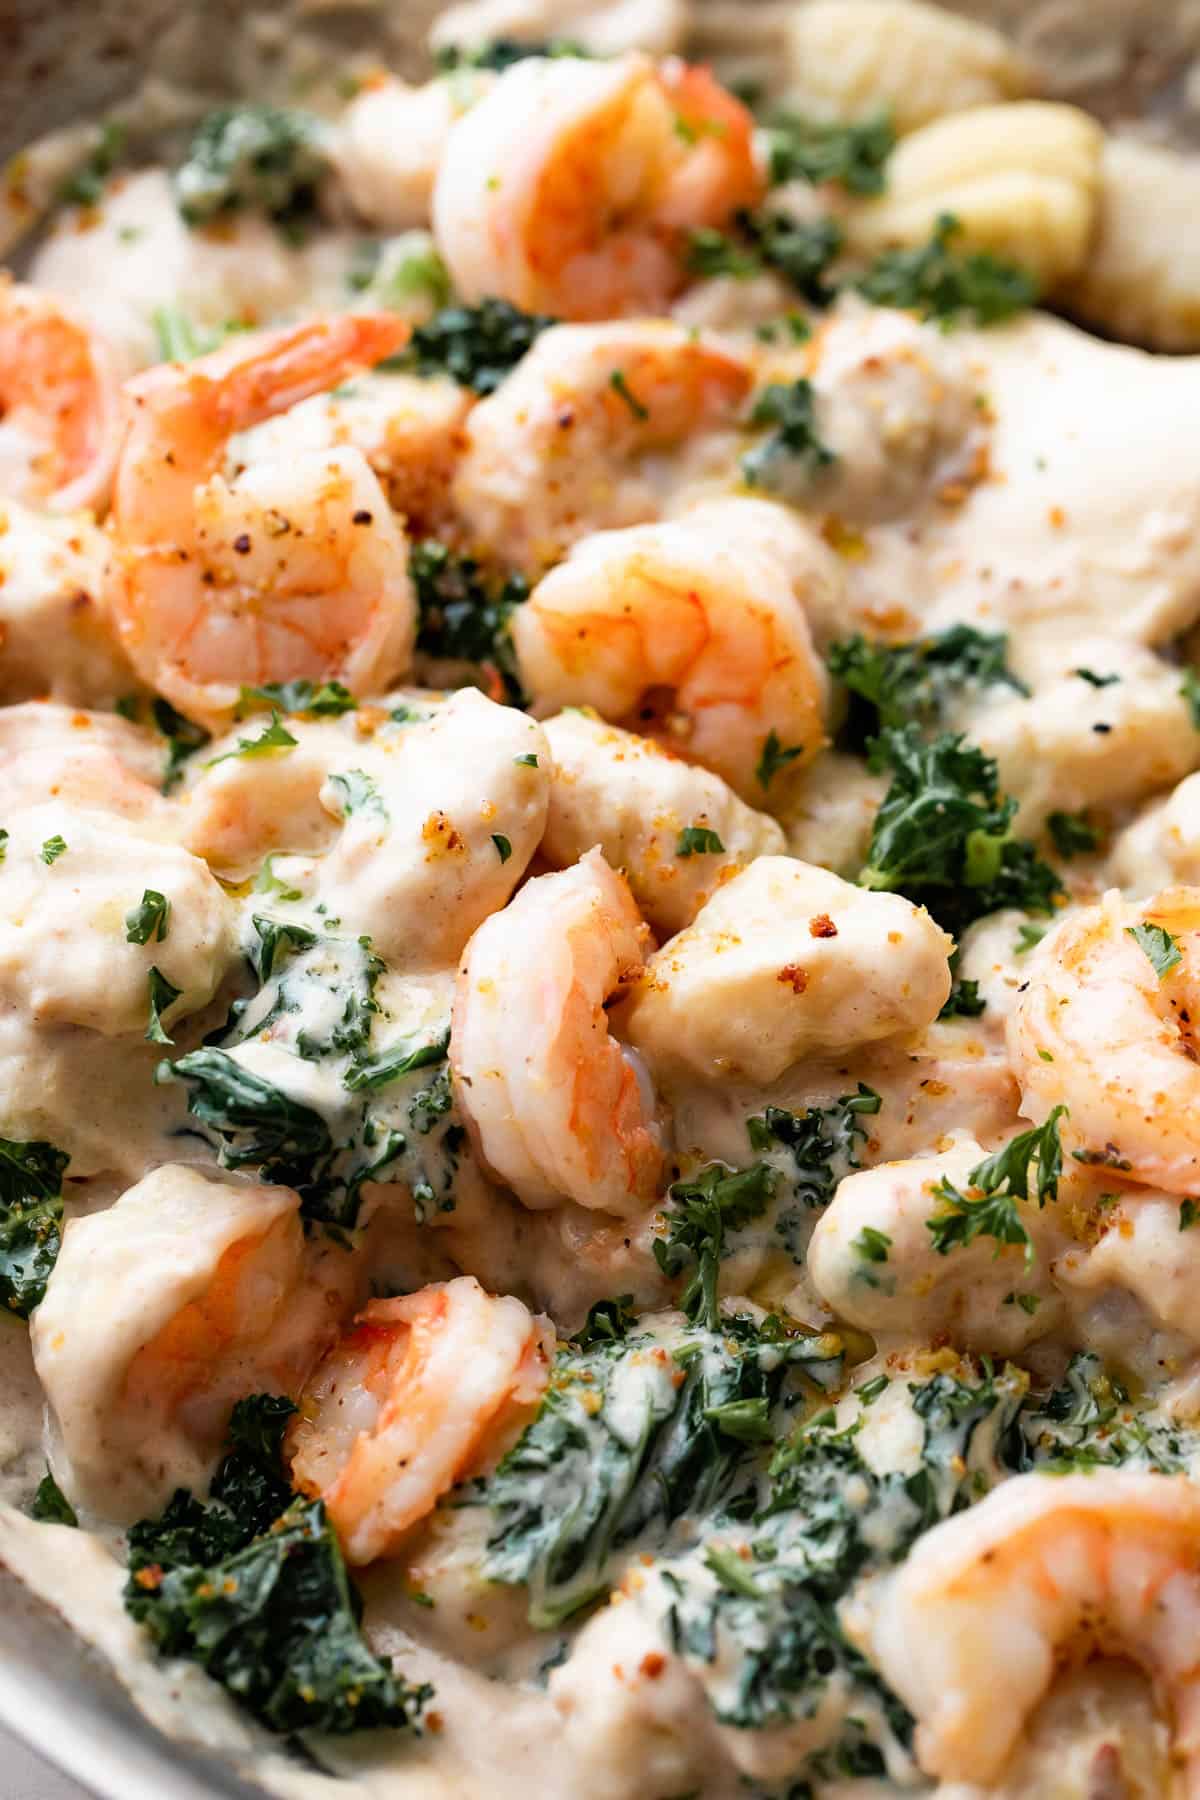 up close shot of a steel skillet filled with cream sauce, gnocchi, shrimp, and greens.